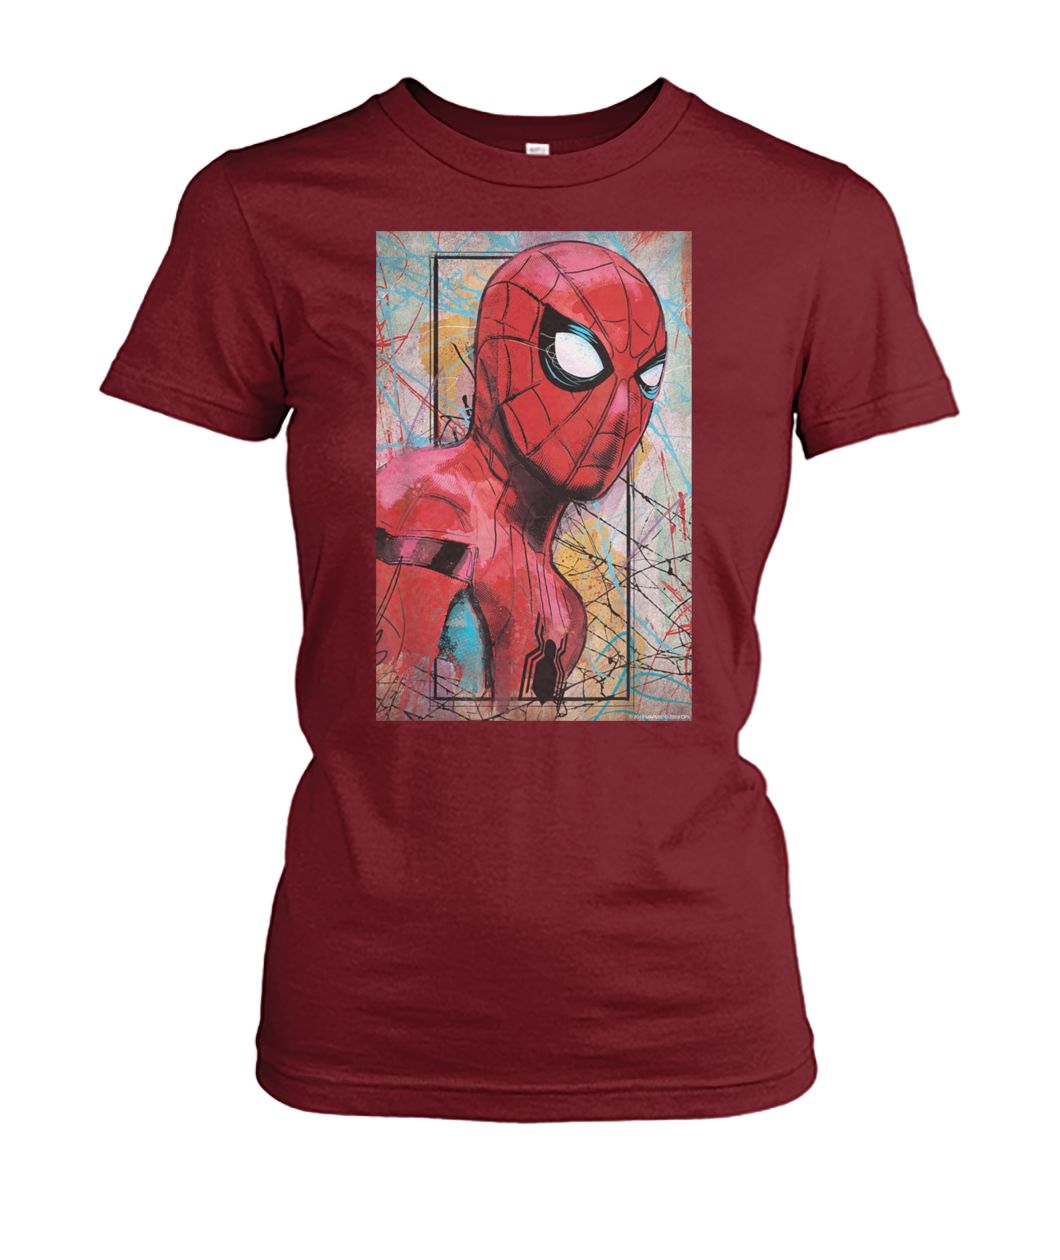 Marvel spider-man far from home poster women's crew tee